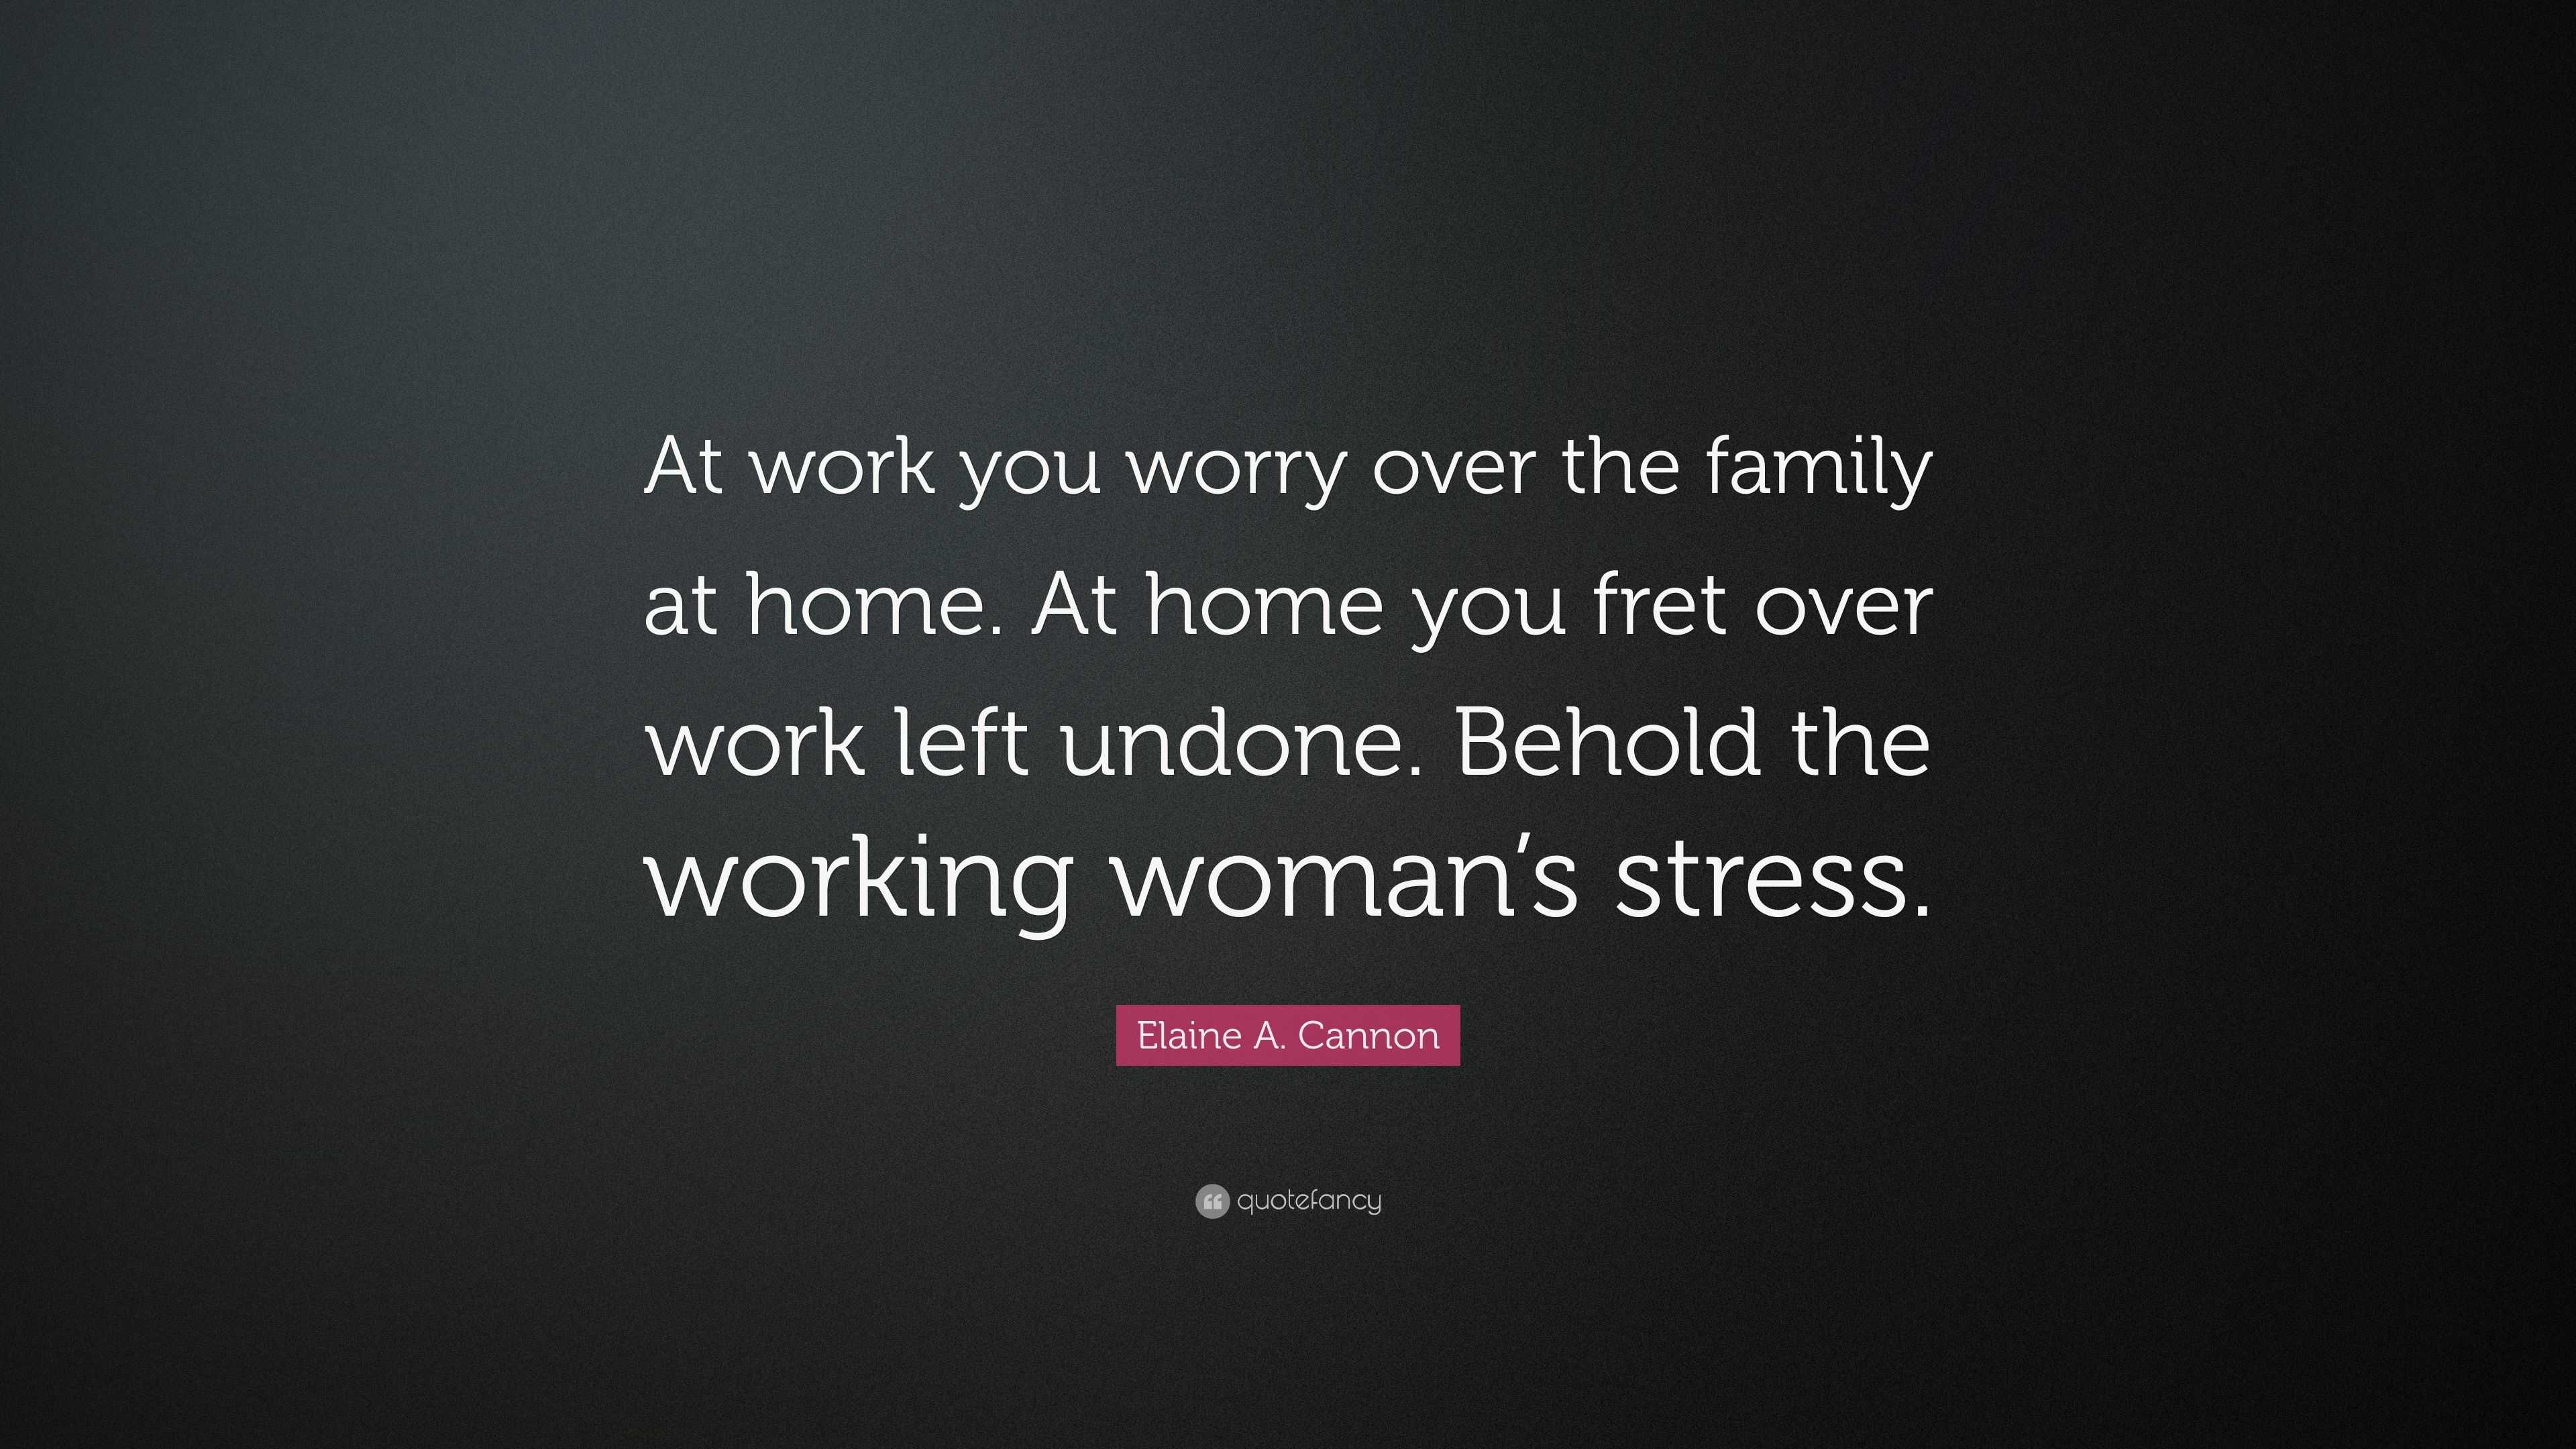 Elaine A. Cannon Quote: “At work you worry over the family at home. At